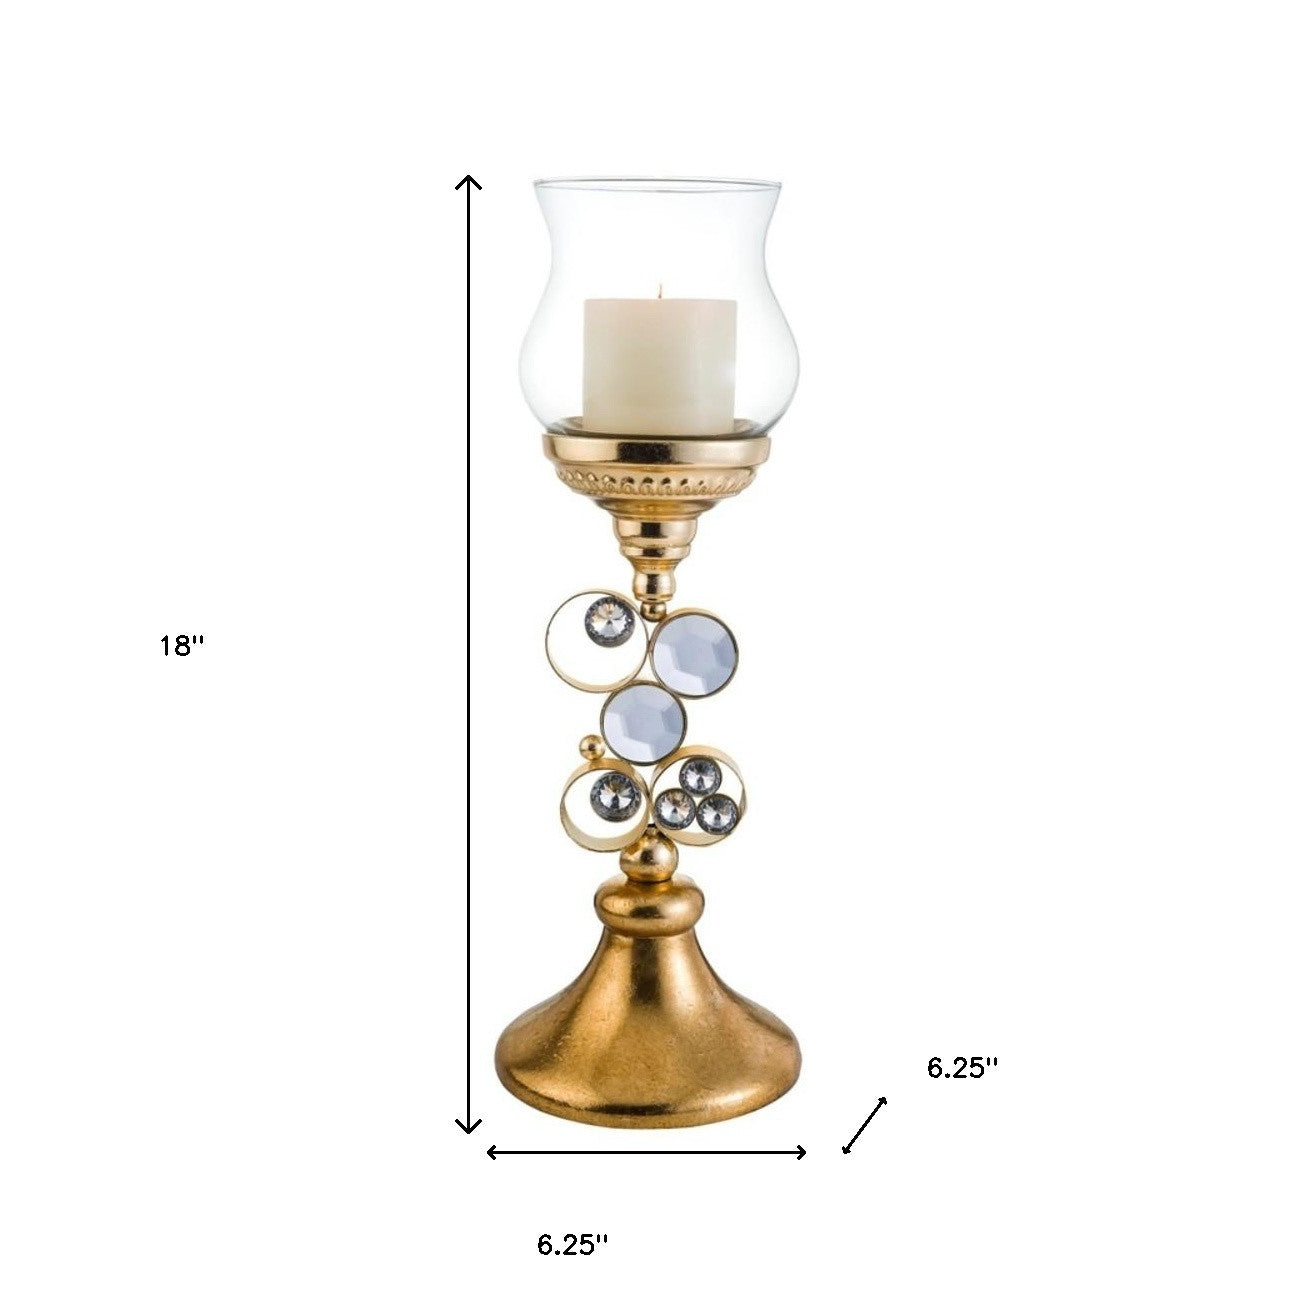 18" Gold and Faux Crystal Bling Tabletop Hurricane Candle Holder